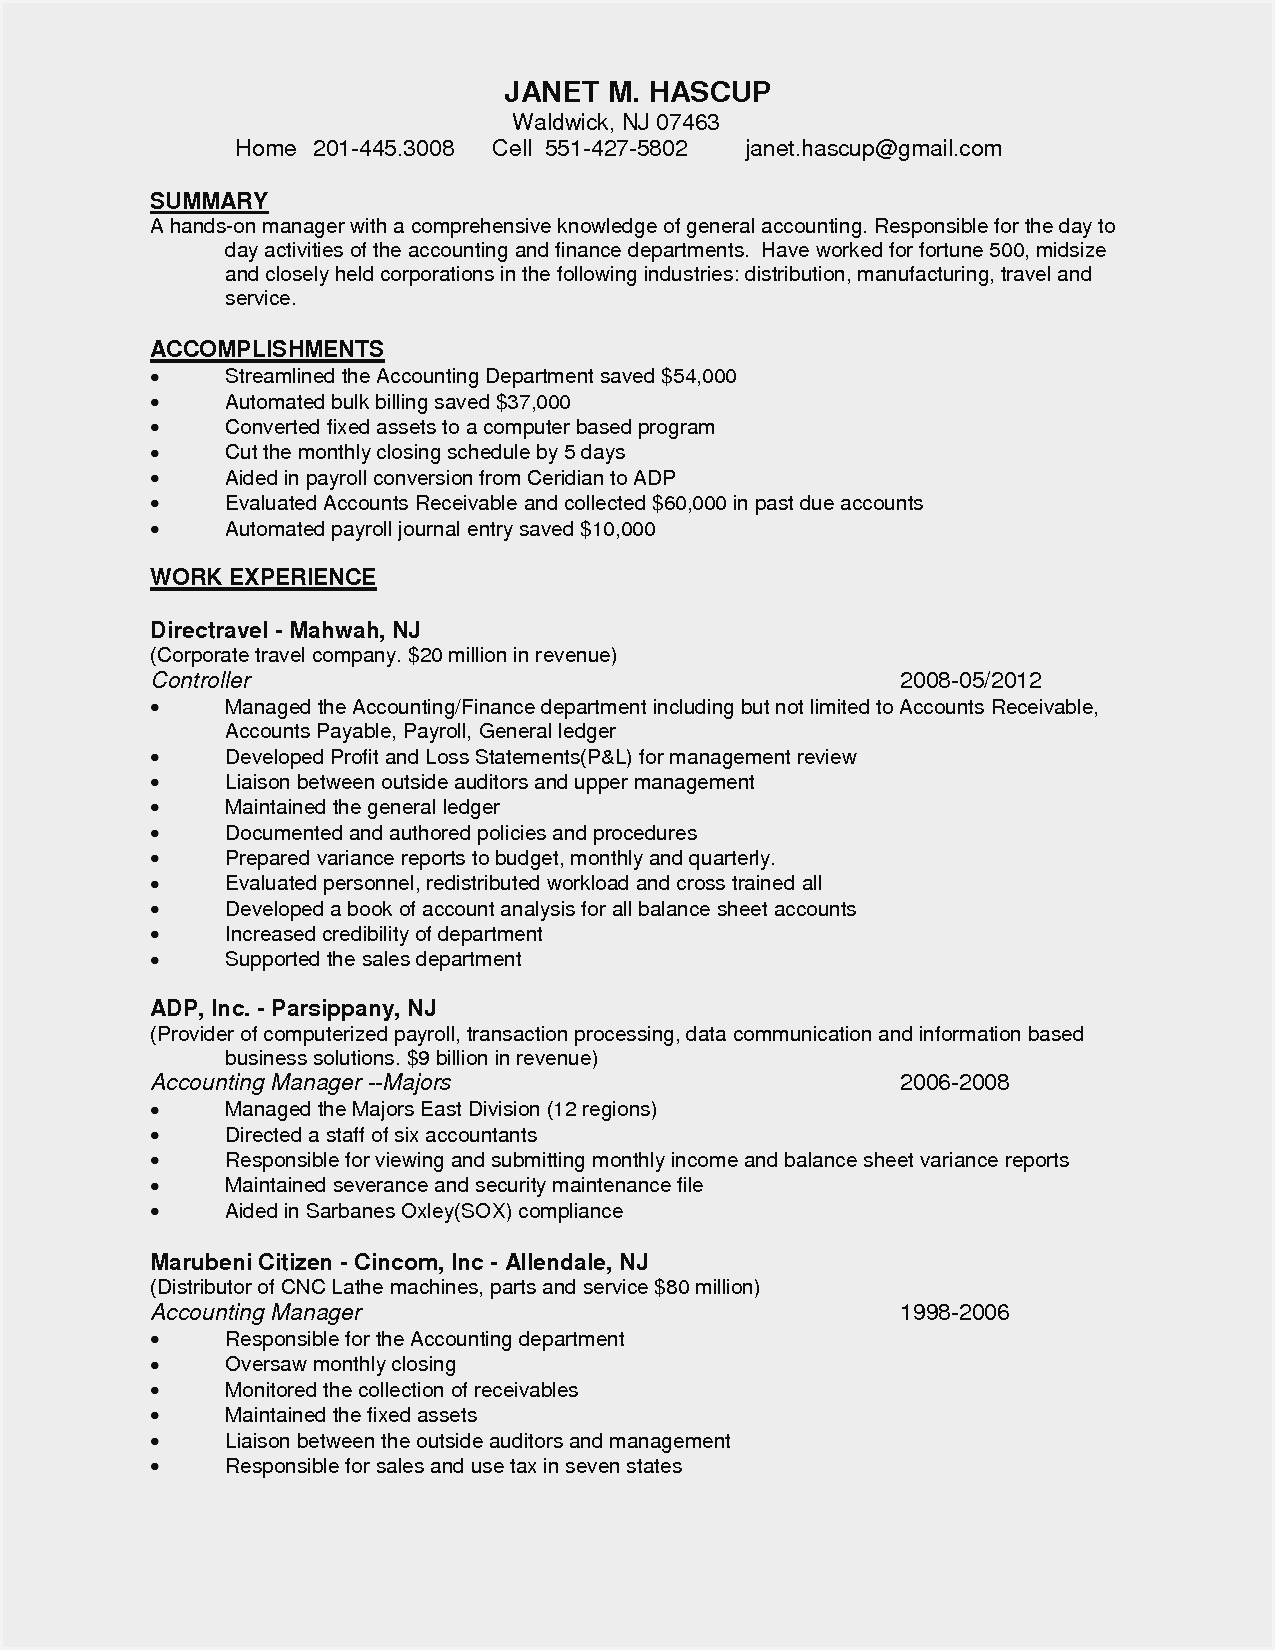 Resume Samples For Accounts Receivable Manager Resume in measurements 1275 X 1650